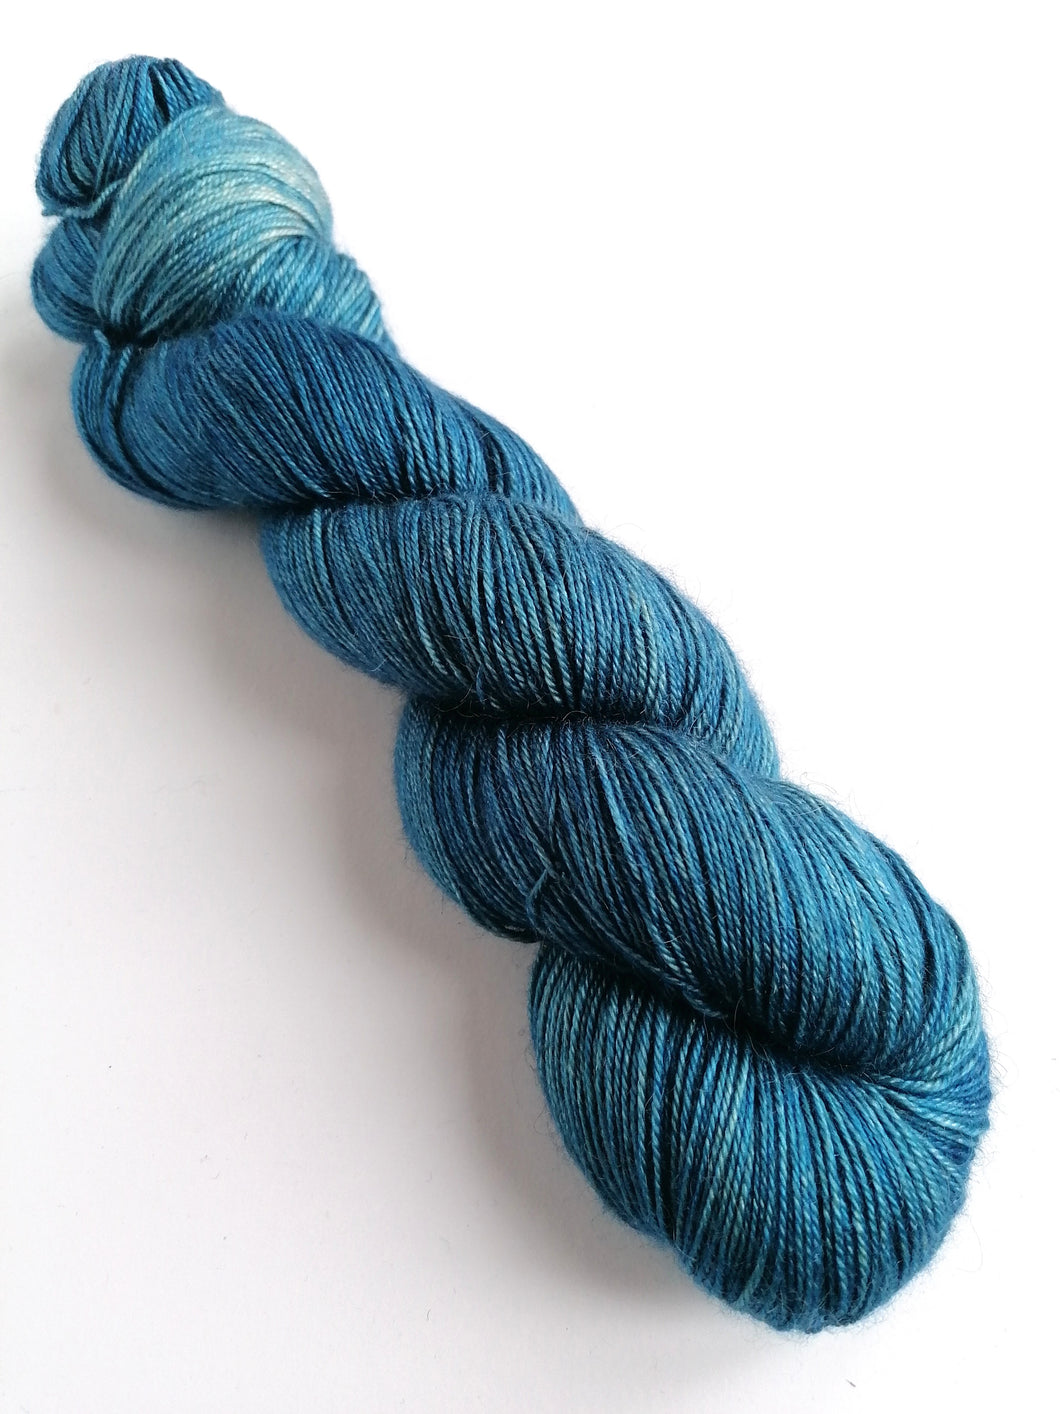 Mid blue twsted skein of yarn on a white background.